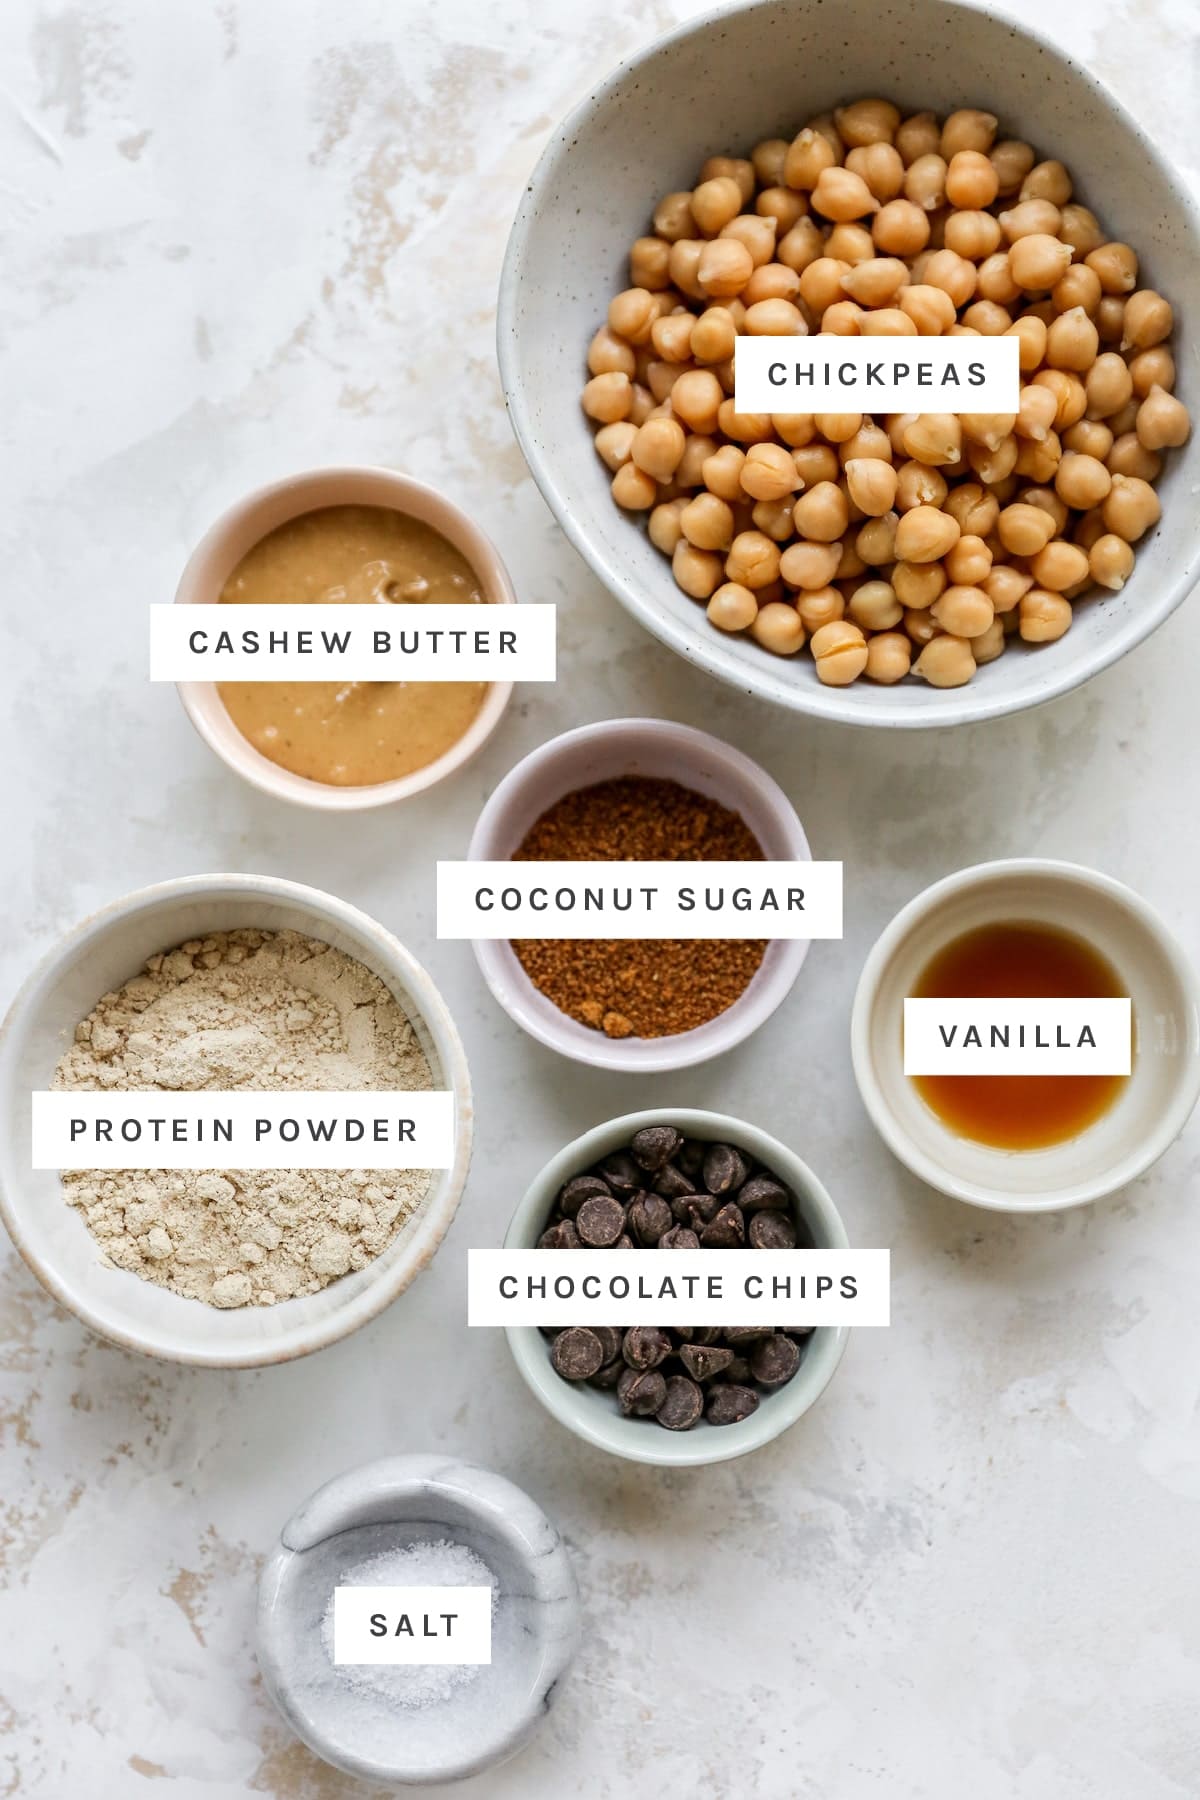 Ingredients measured out to make protein cookie dough: chickpeas, cashew butter, coconut sugar, vanilla, protein powder, chocolate chips and salt.